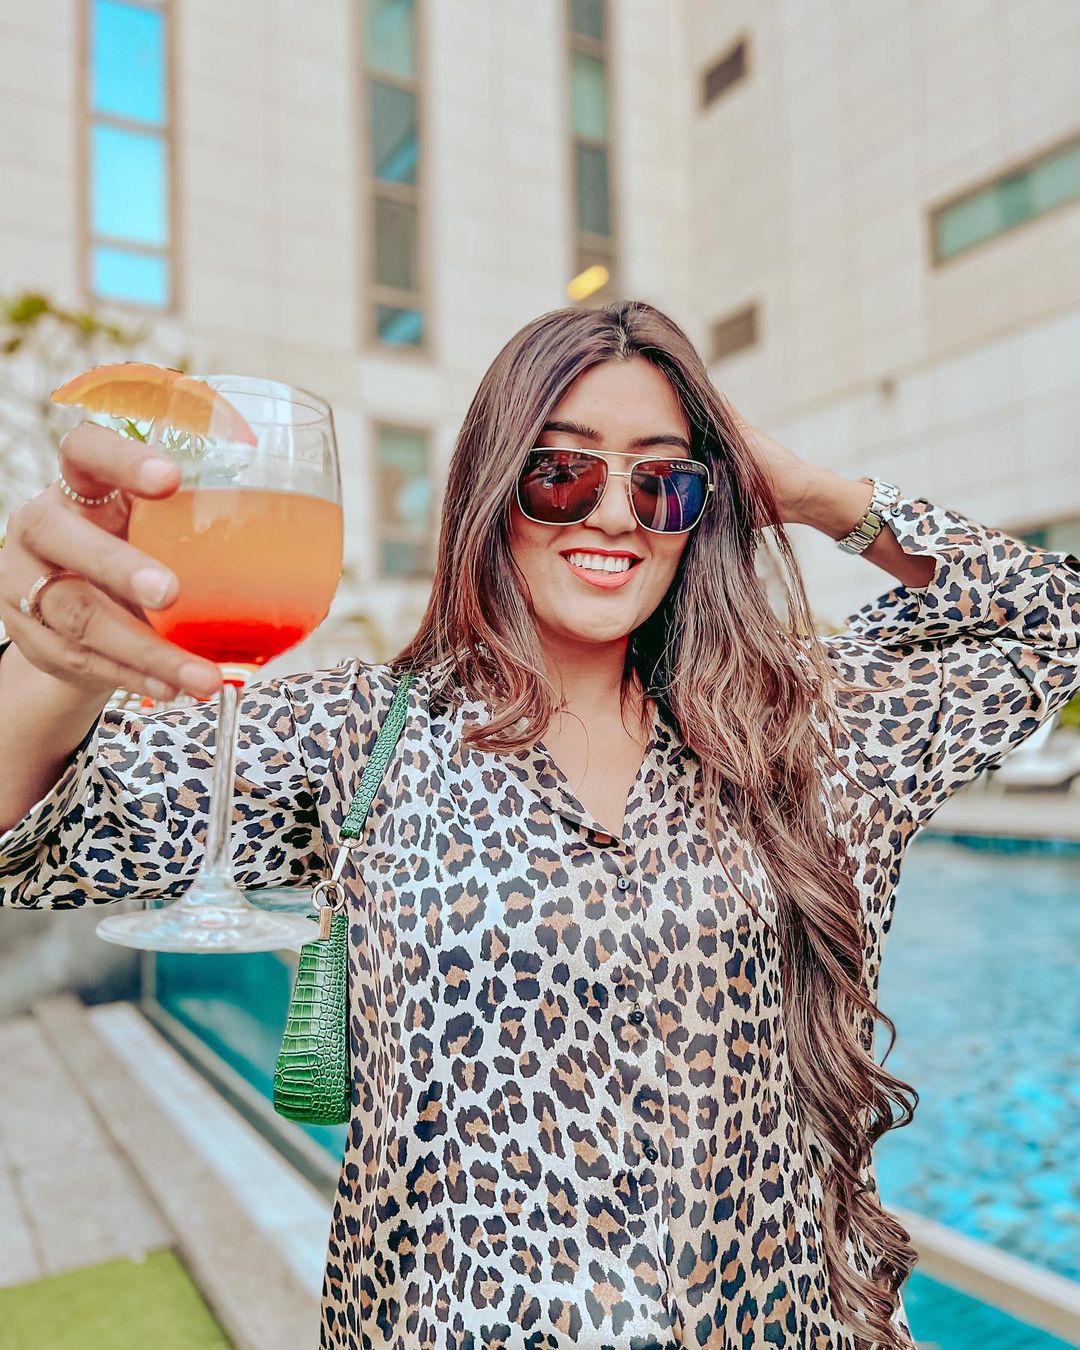 Shireen Mirza in leopard shirt and holding a glass of juice